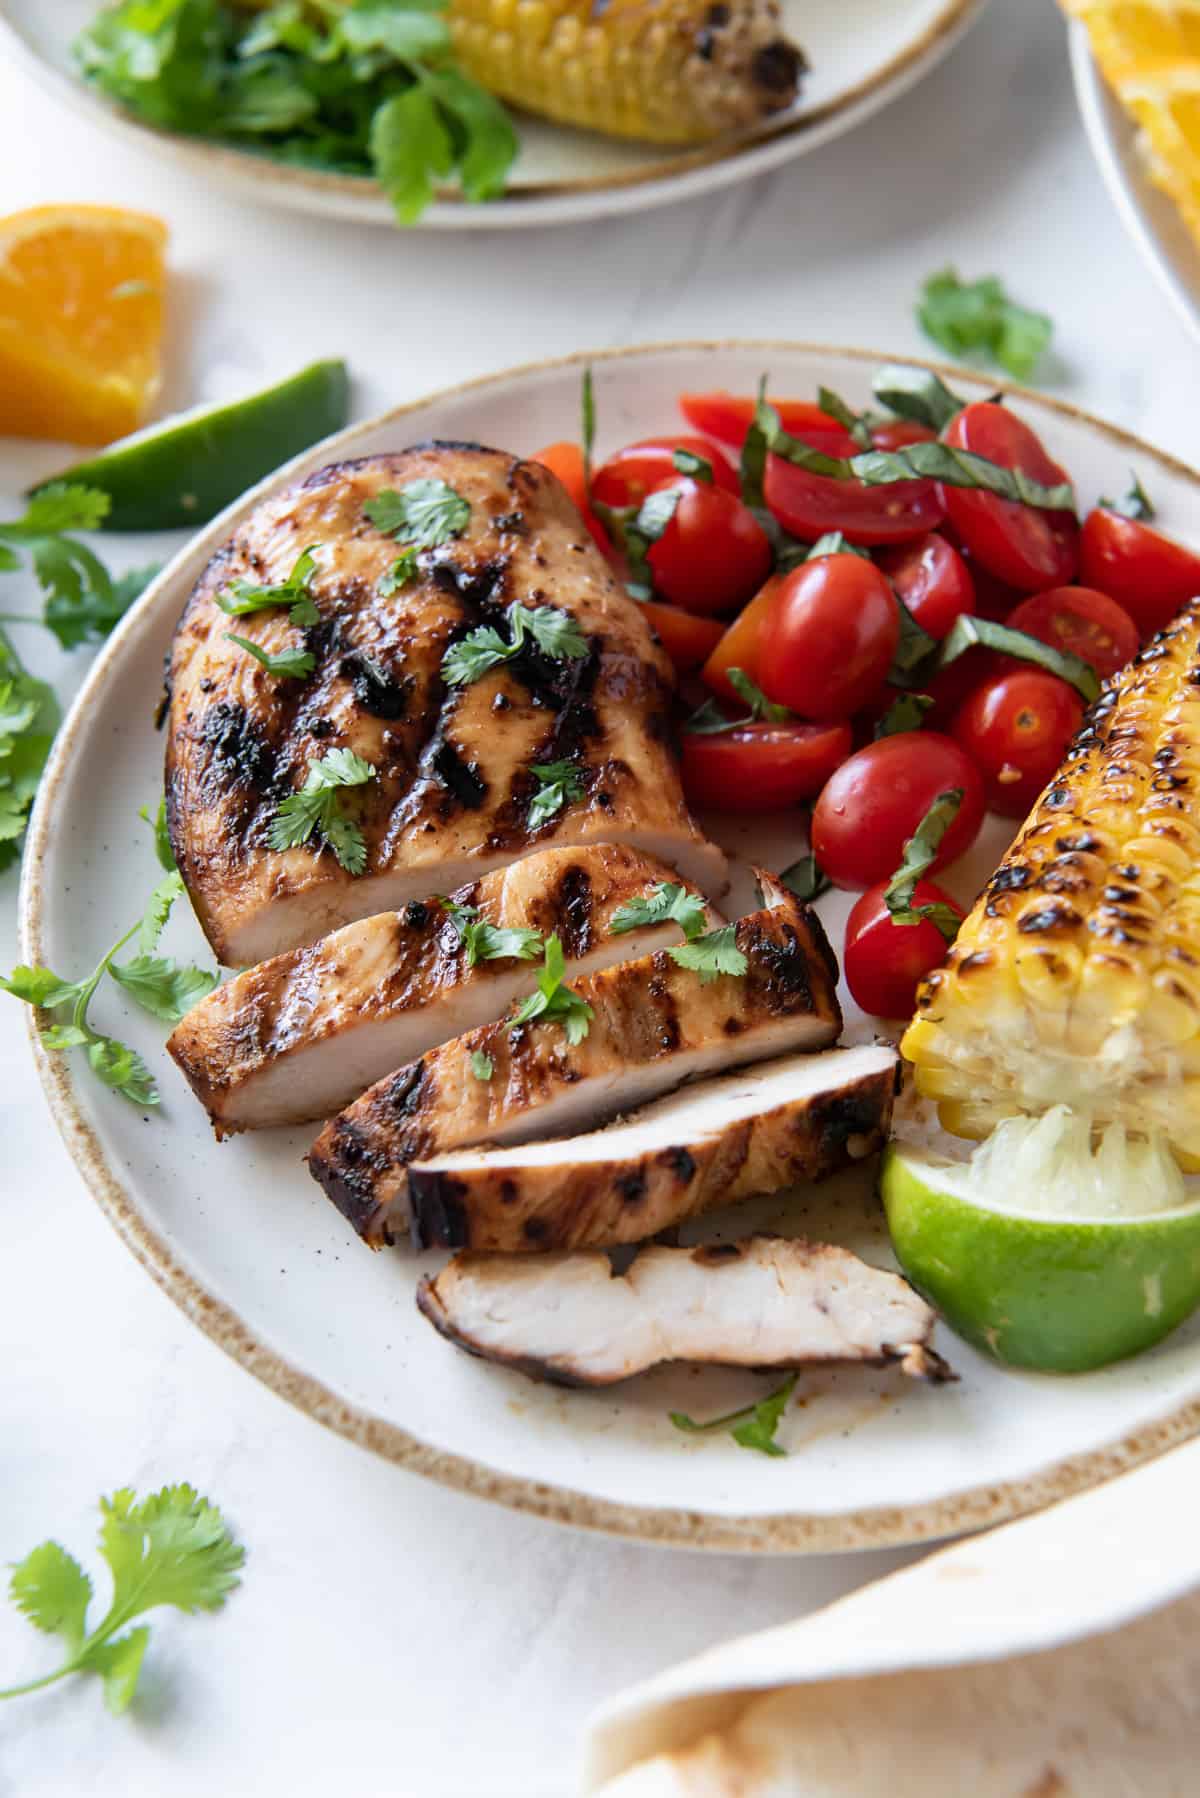 Sliced grilled chicken on a plate with cherry tomatoes and corn.